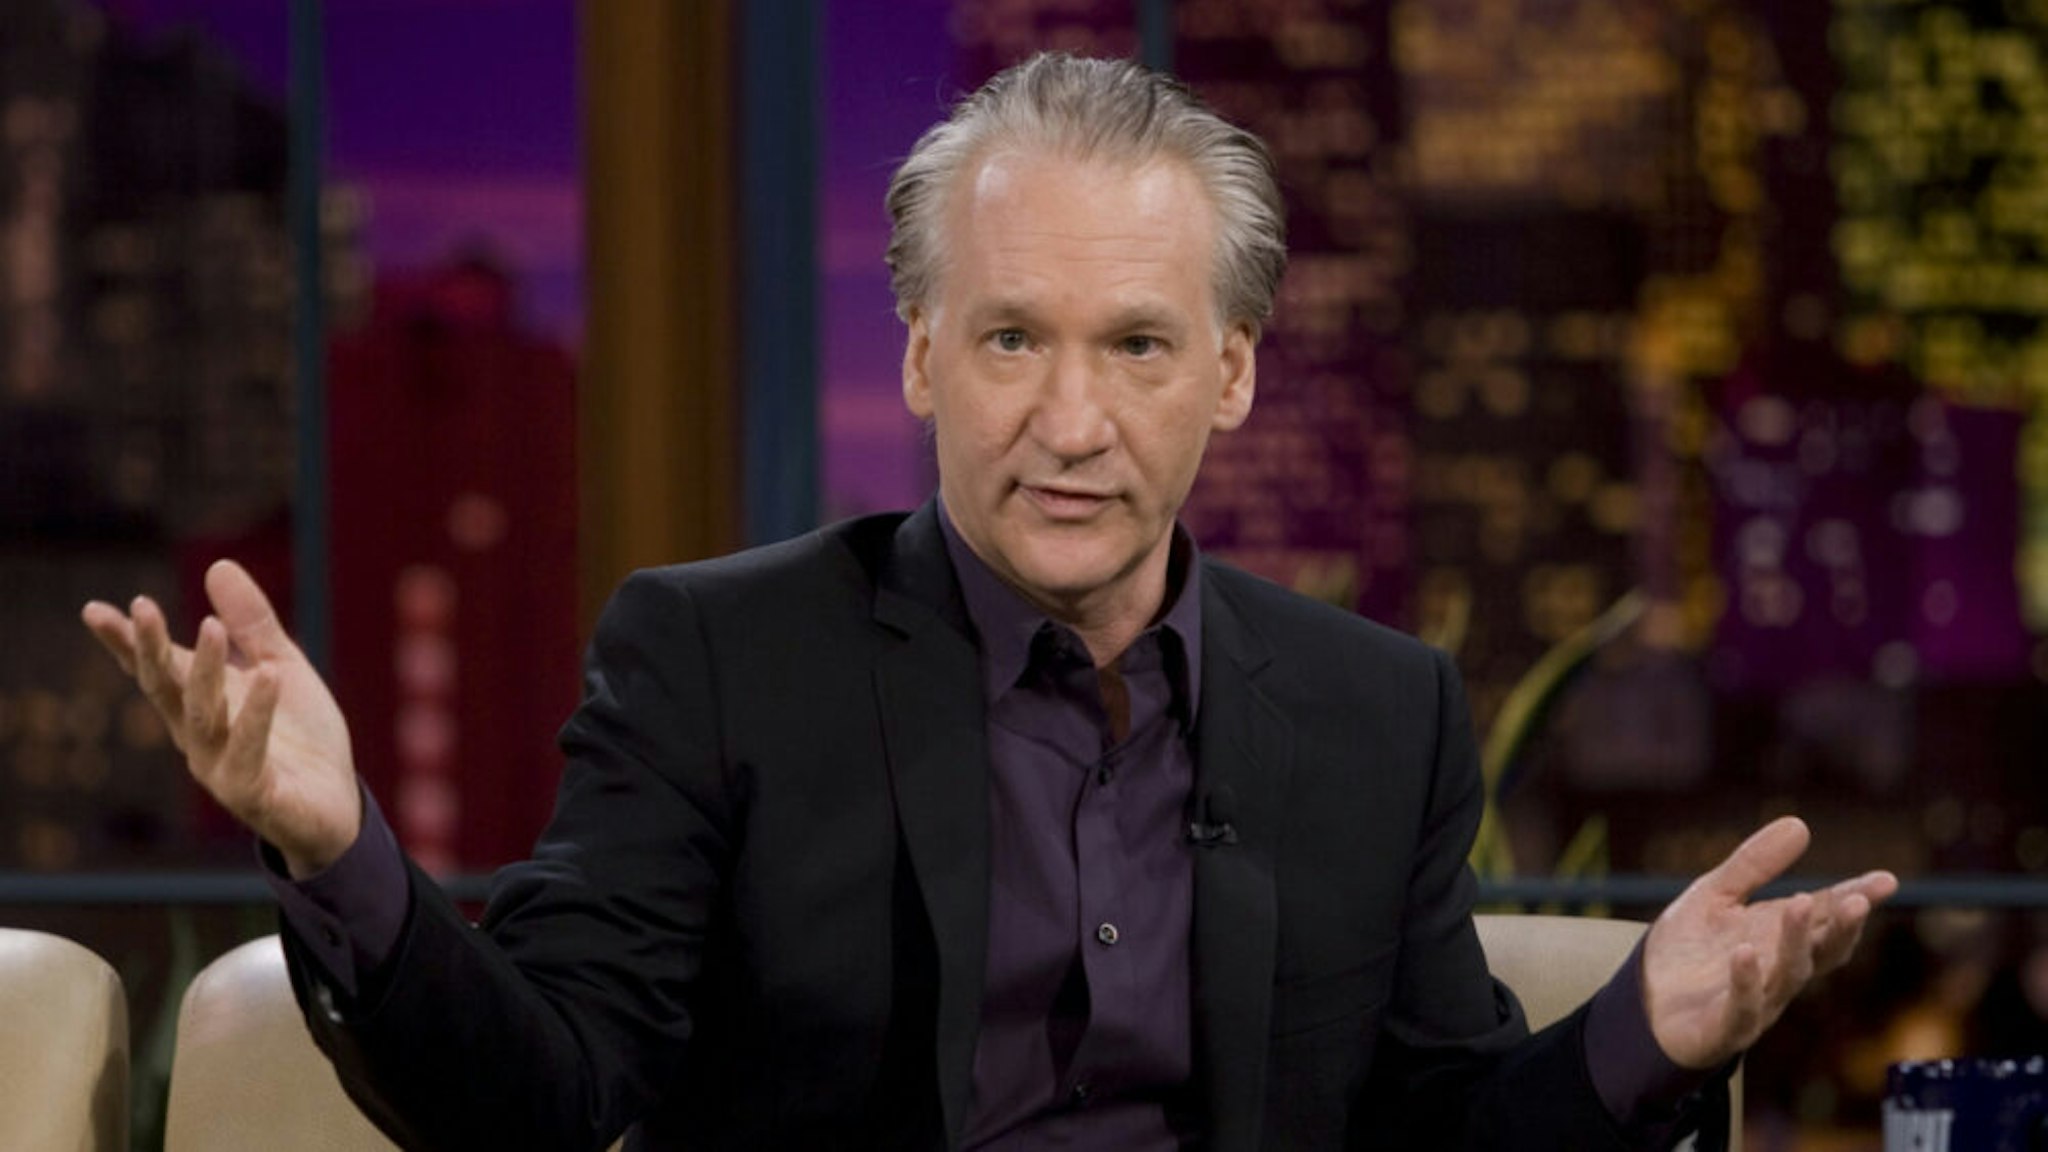 Television personality Bill Maher during an interview on October 7, 2008.